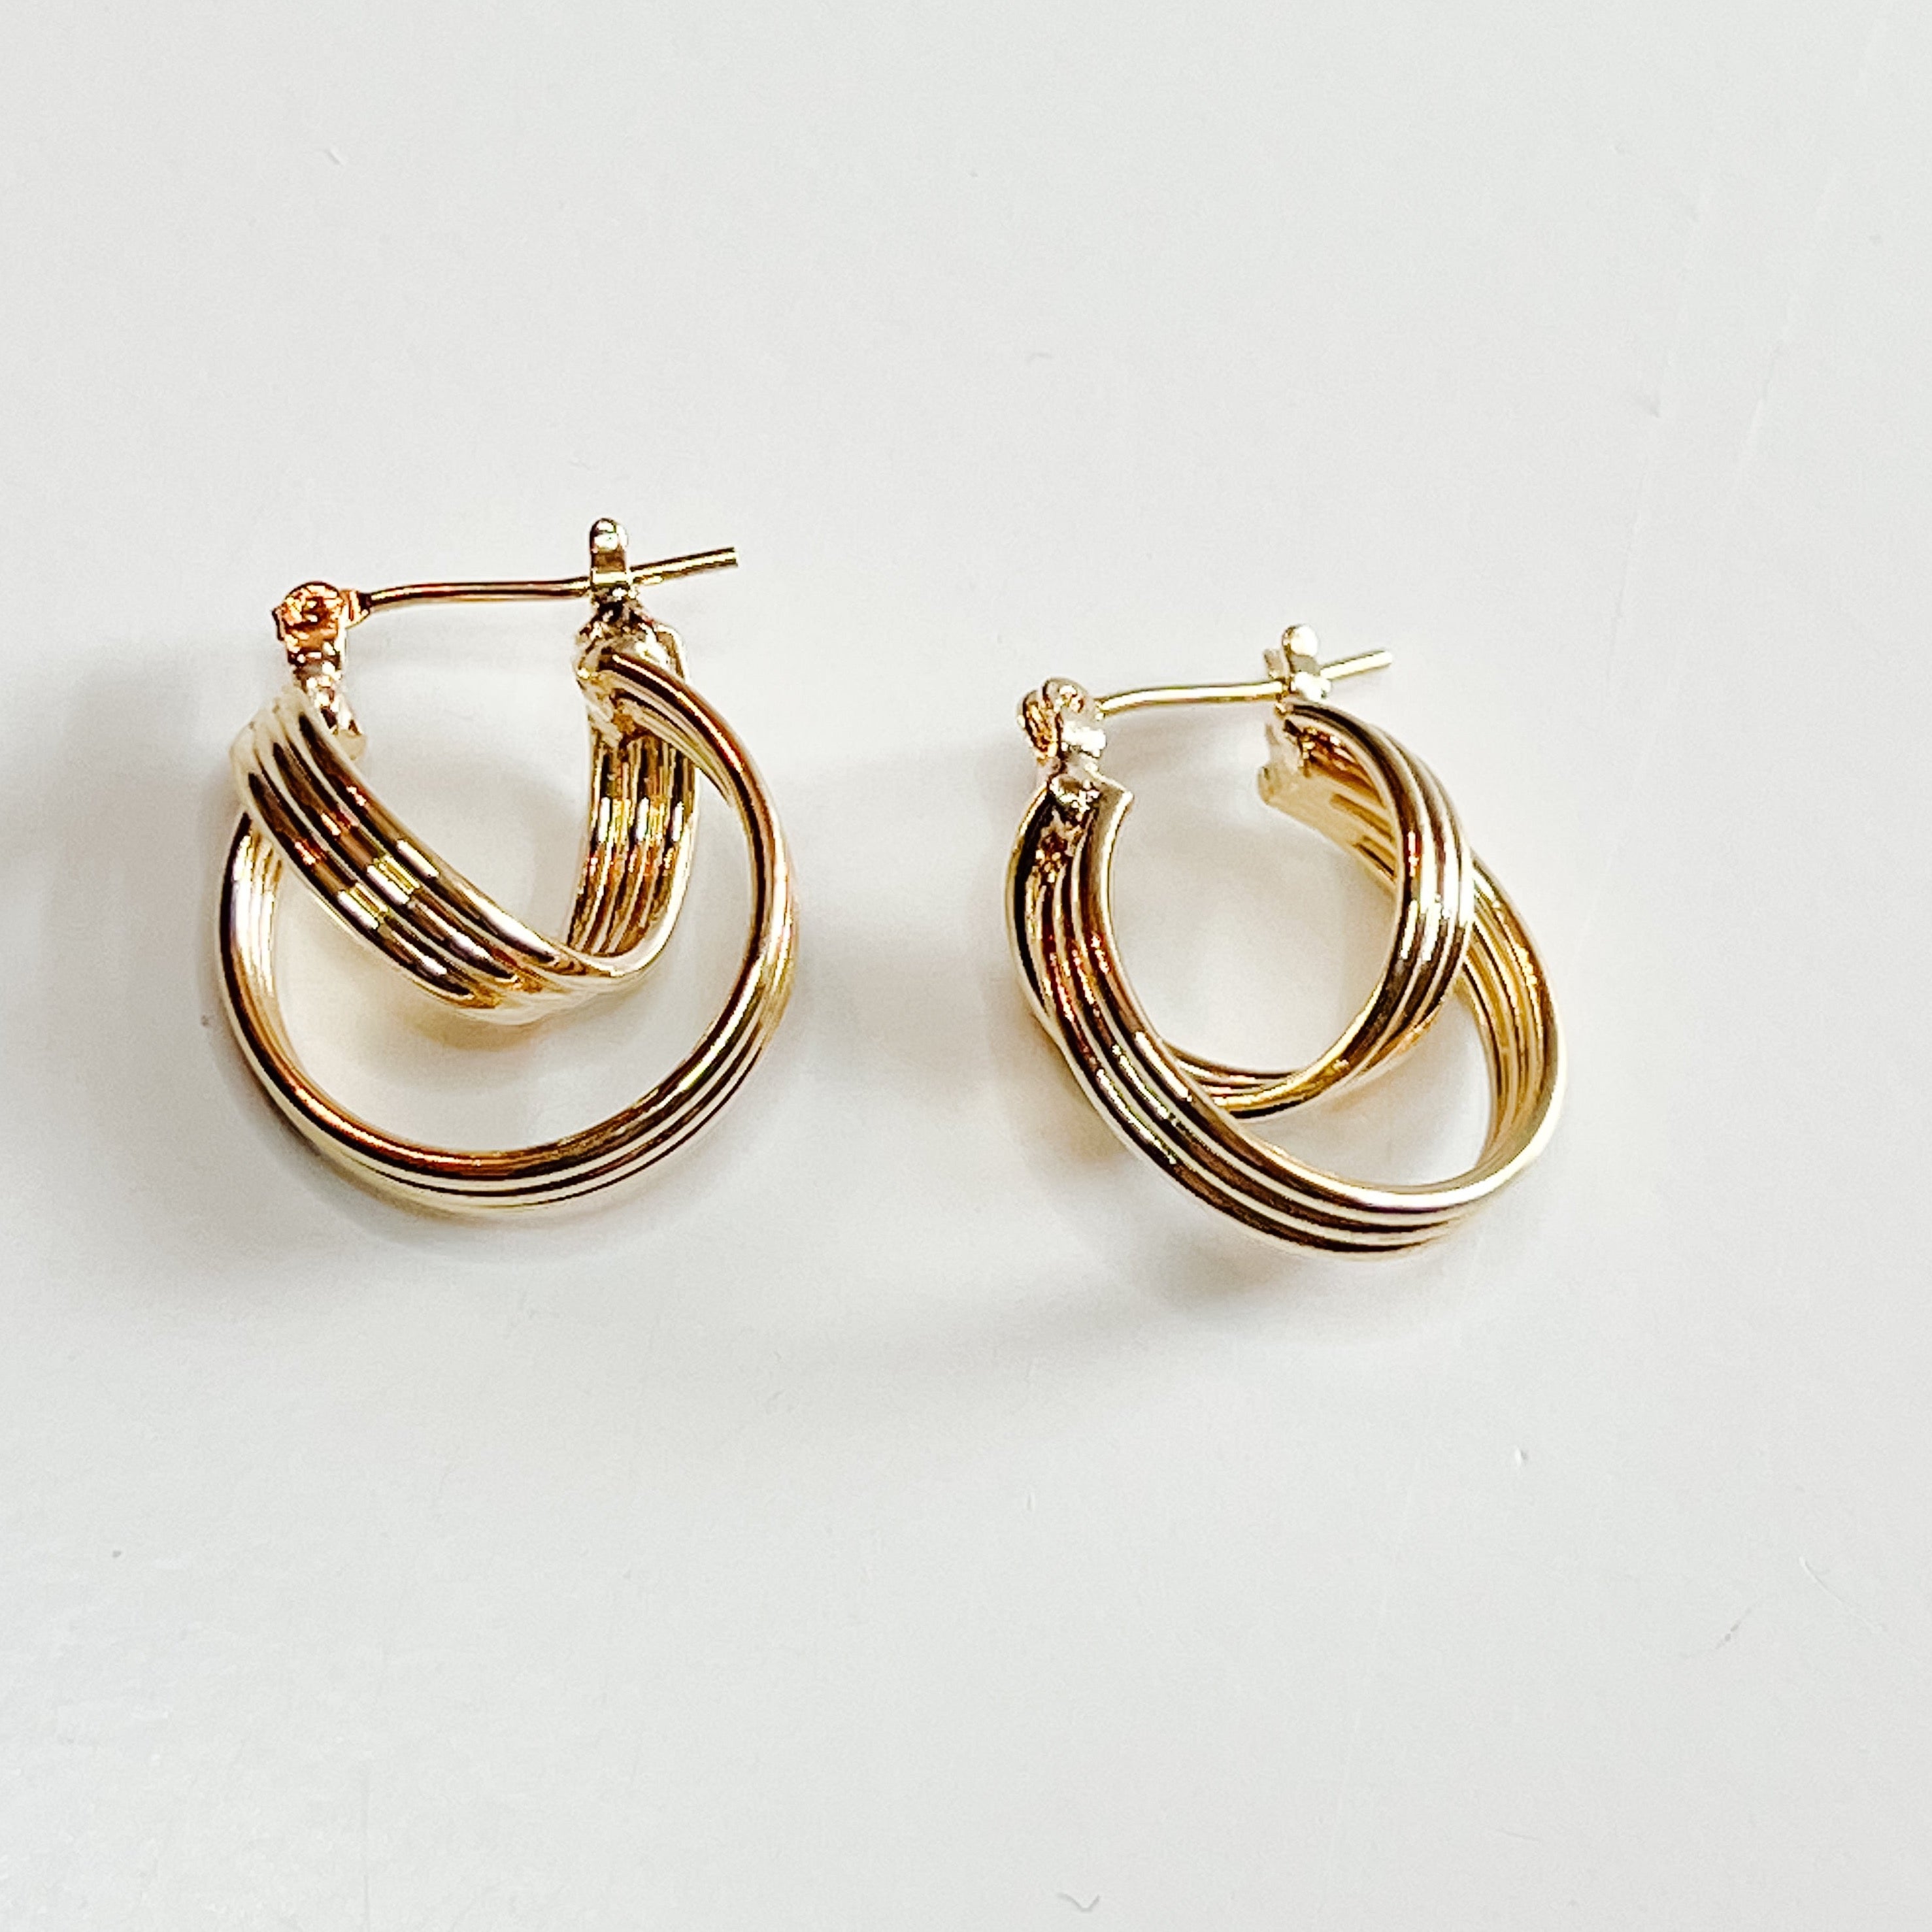 Earrings, Rudy - Danshire Market and Design 